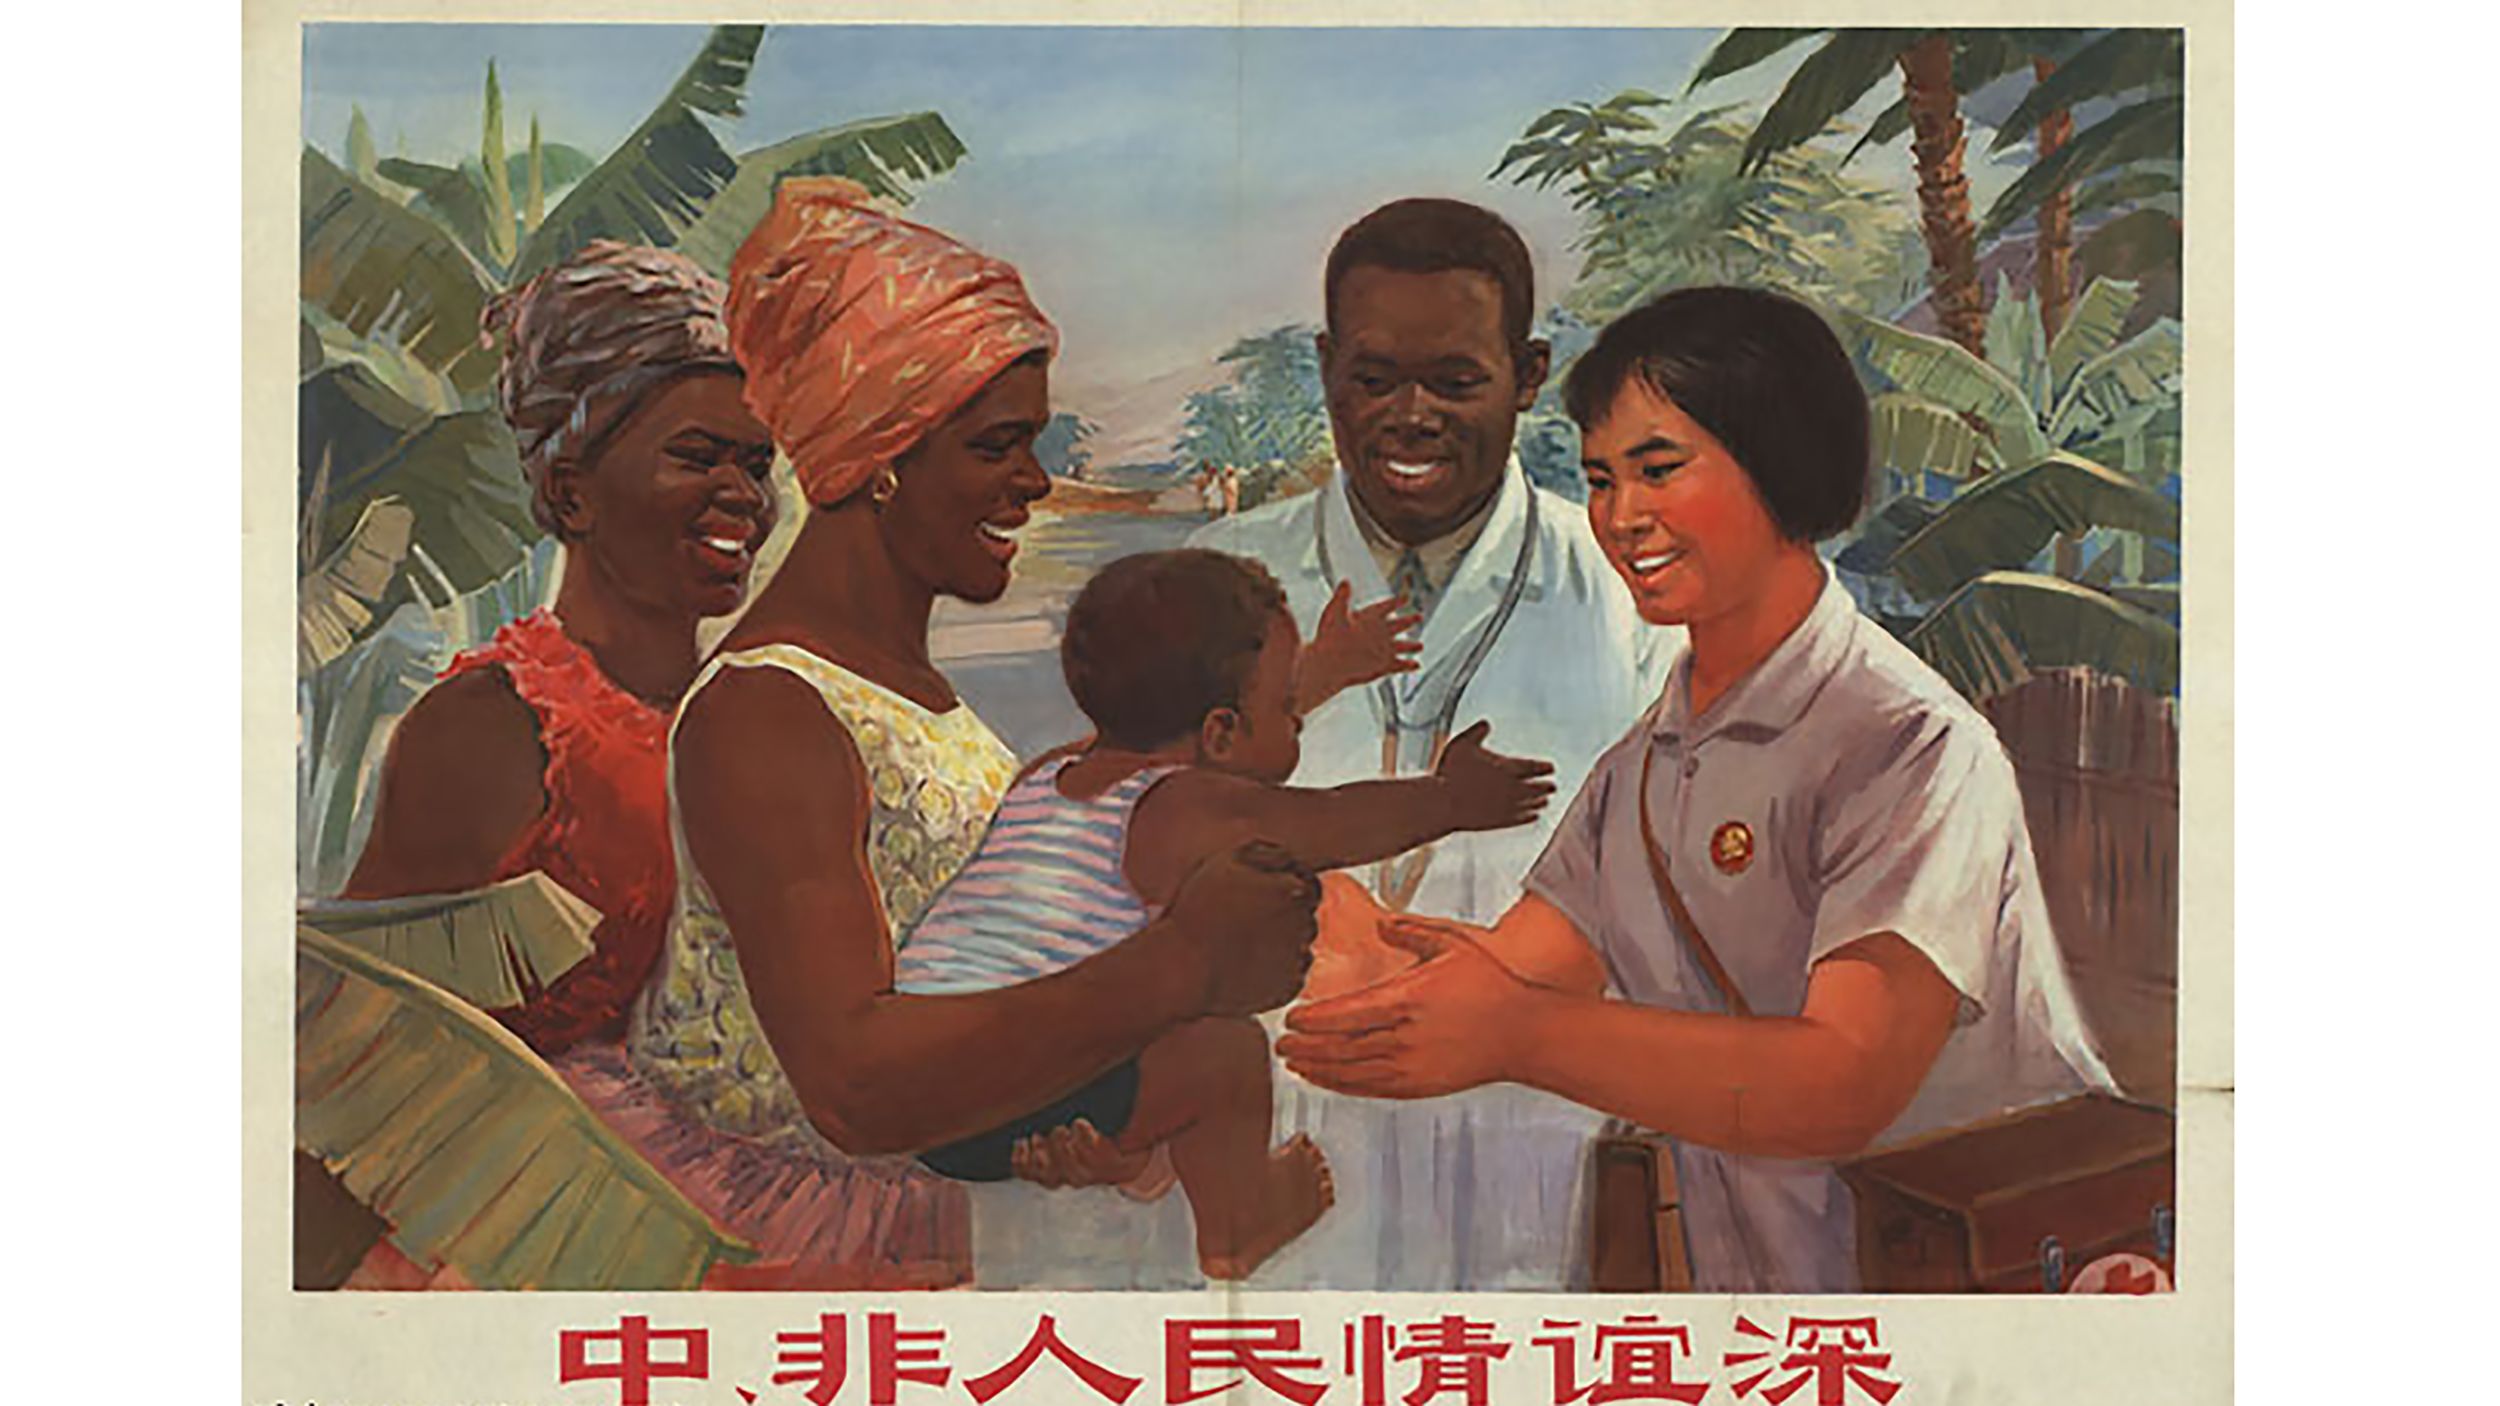 We wanted to know if Chinese migrants in Africa self-segregate. What we  found